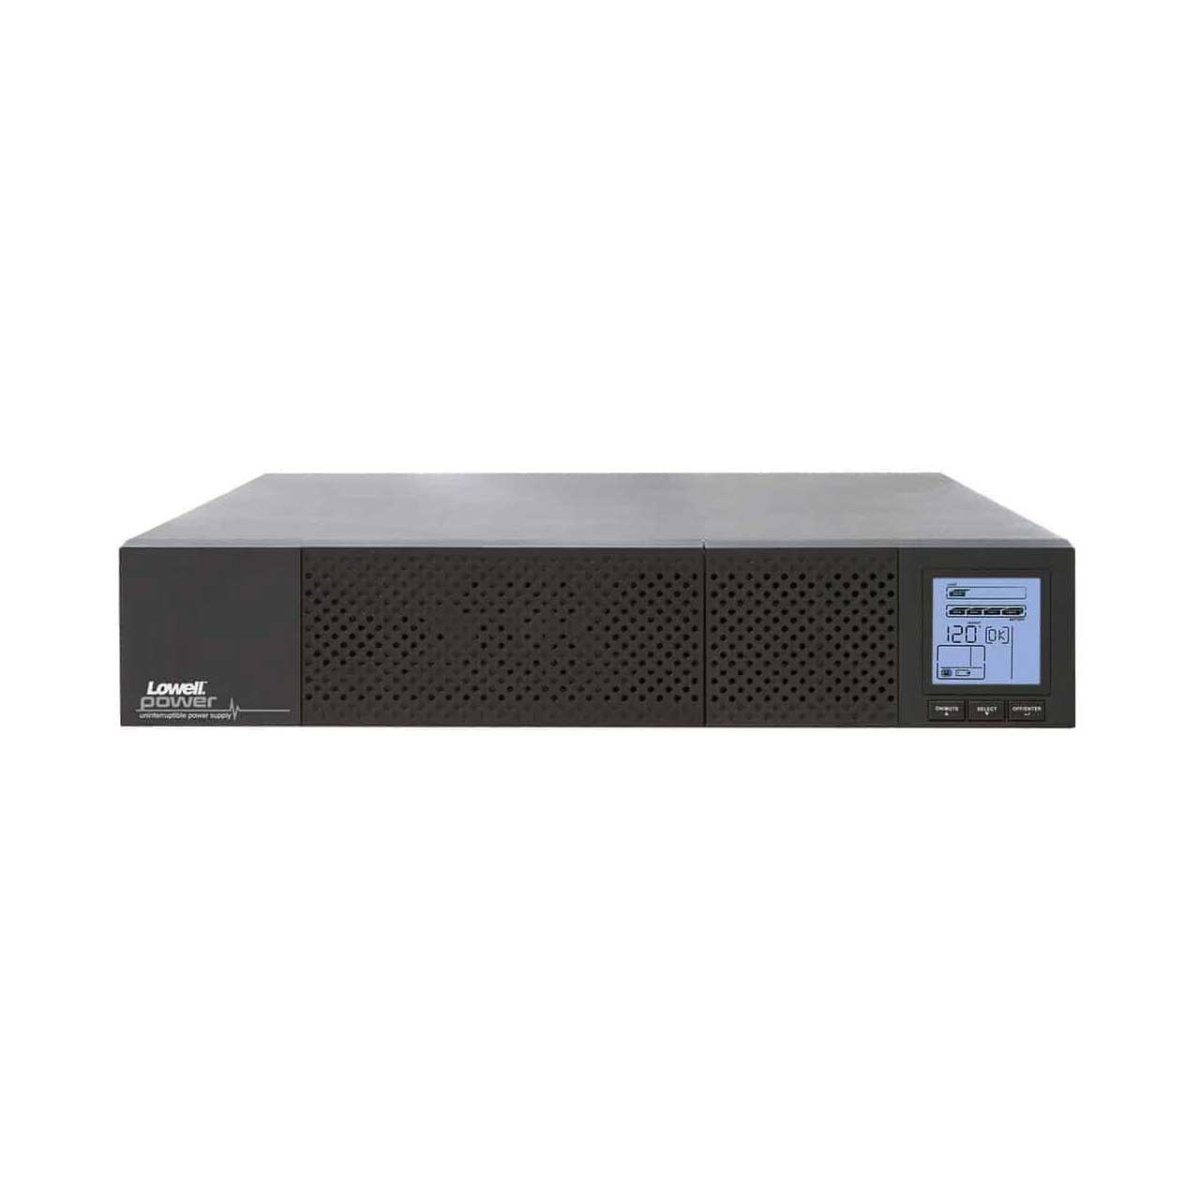 Picture of Lowell Manufacturing LMC-UPS8-2000-CD UPS8-2000-CD Line-Interactive UPS - Lead-Acid with Bypass - SNMP 2000VA